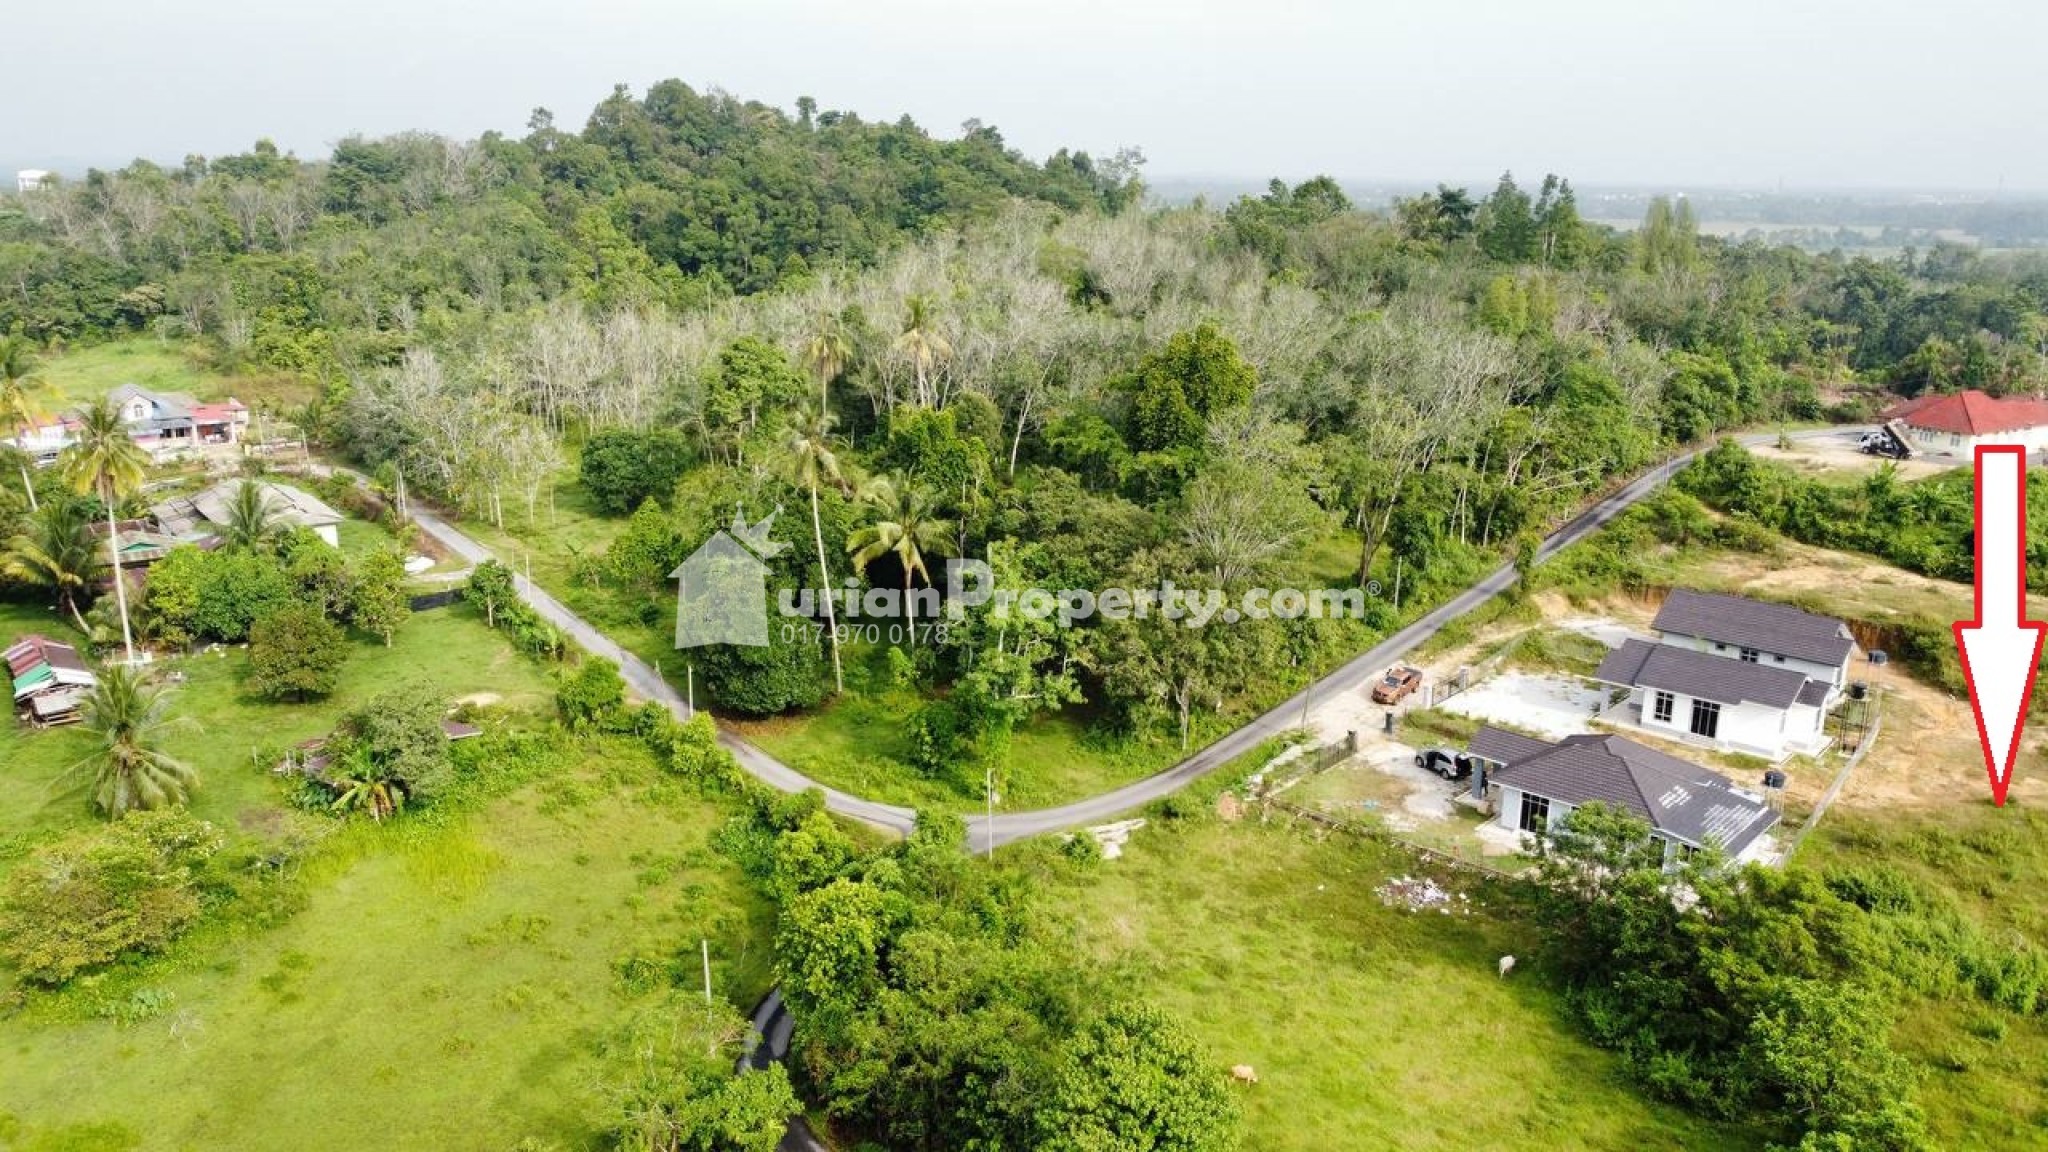 Bungalow Lot For Sale at Machang